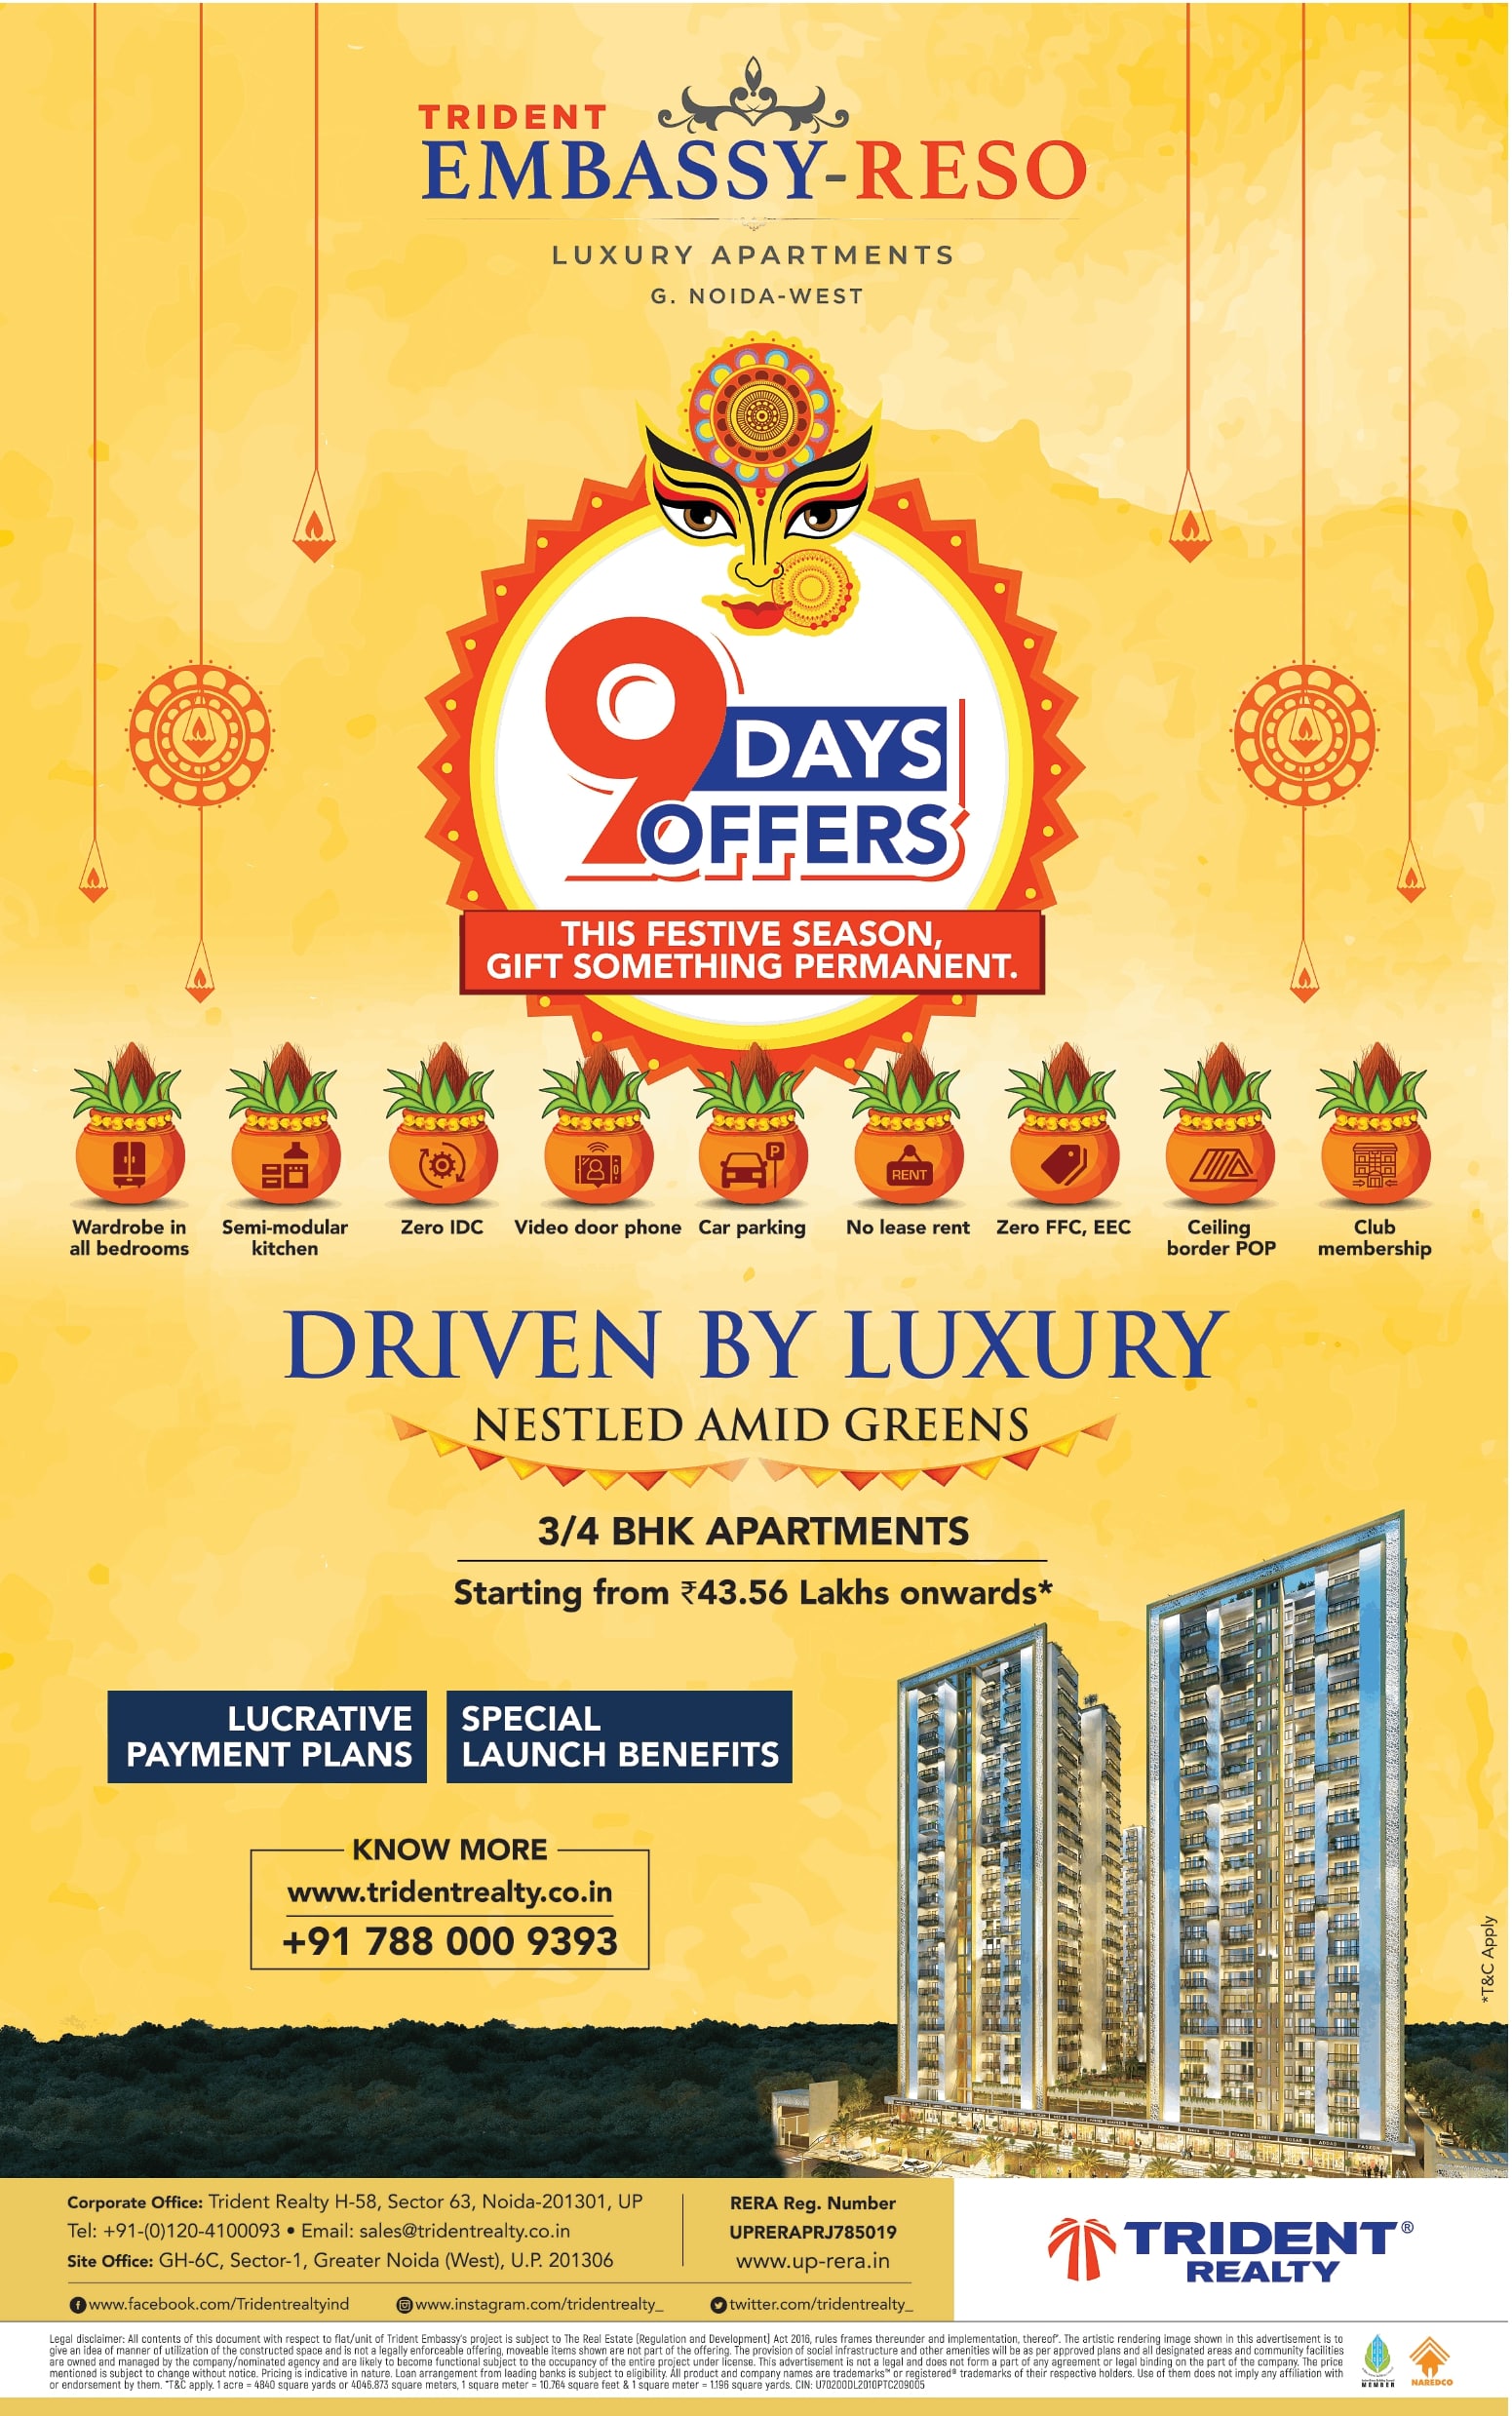 trident-embassy-reso-9-days-offers-ad-delhi-times-11-04-2021